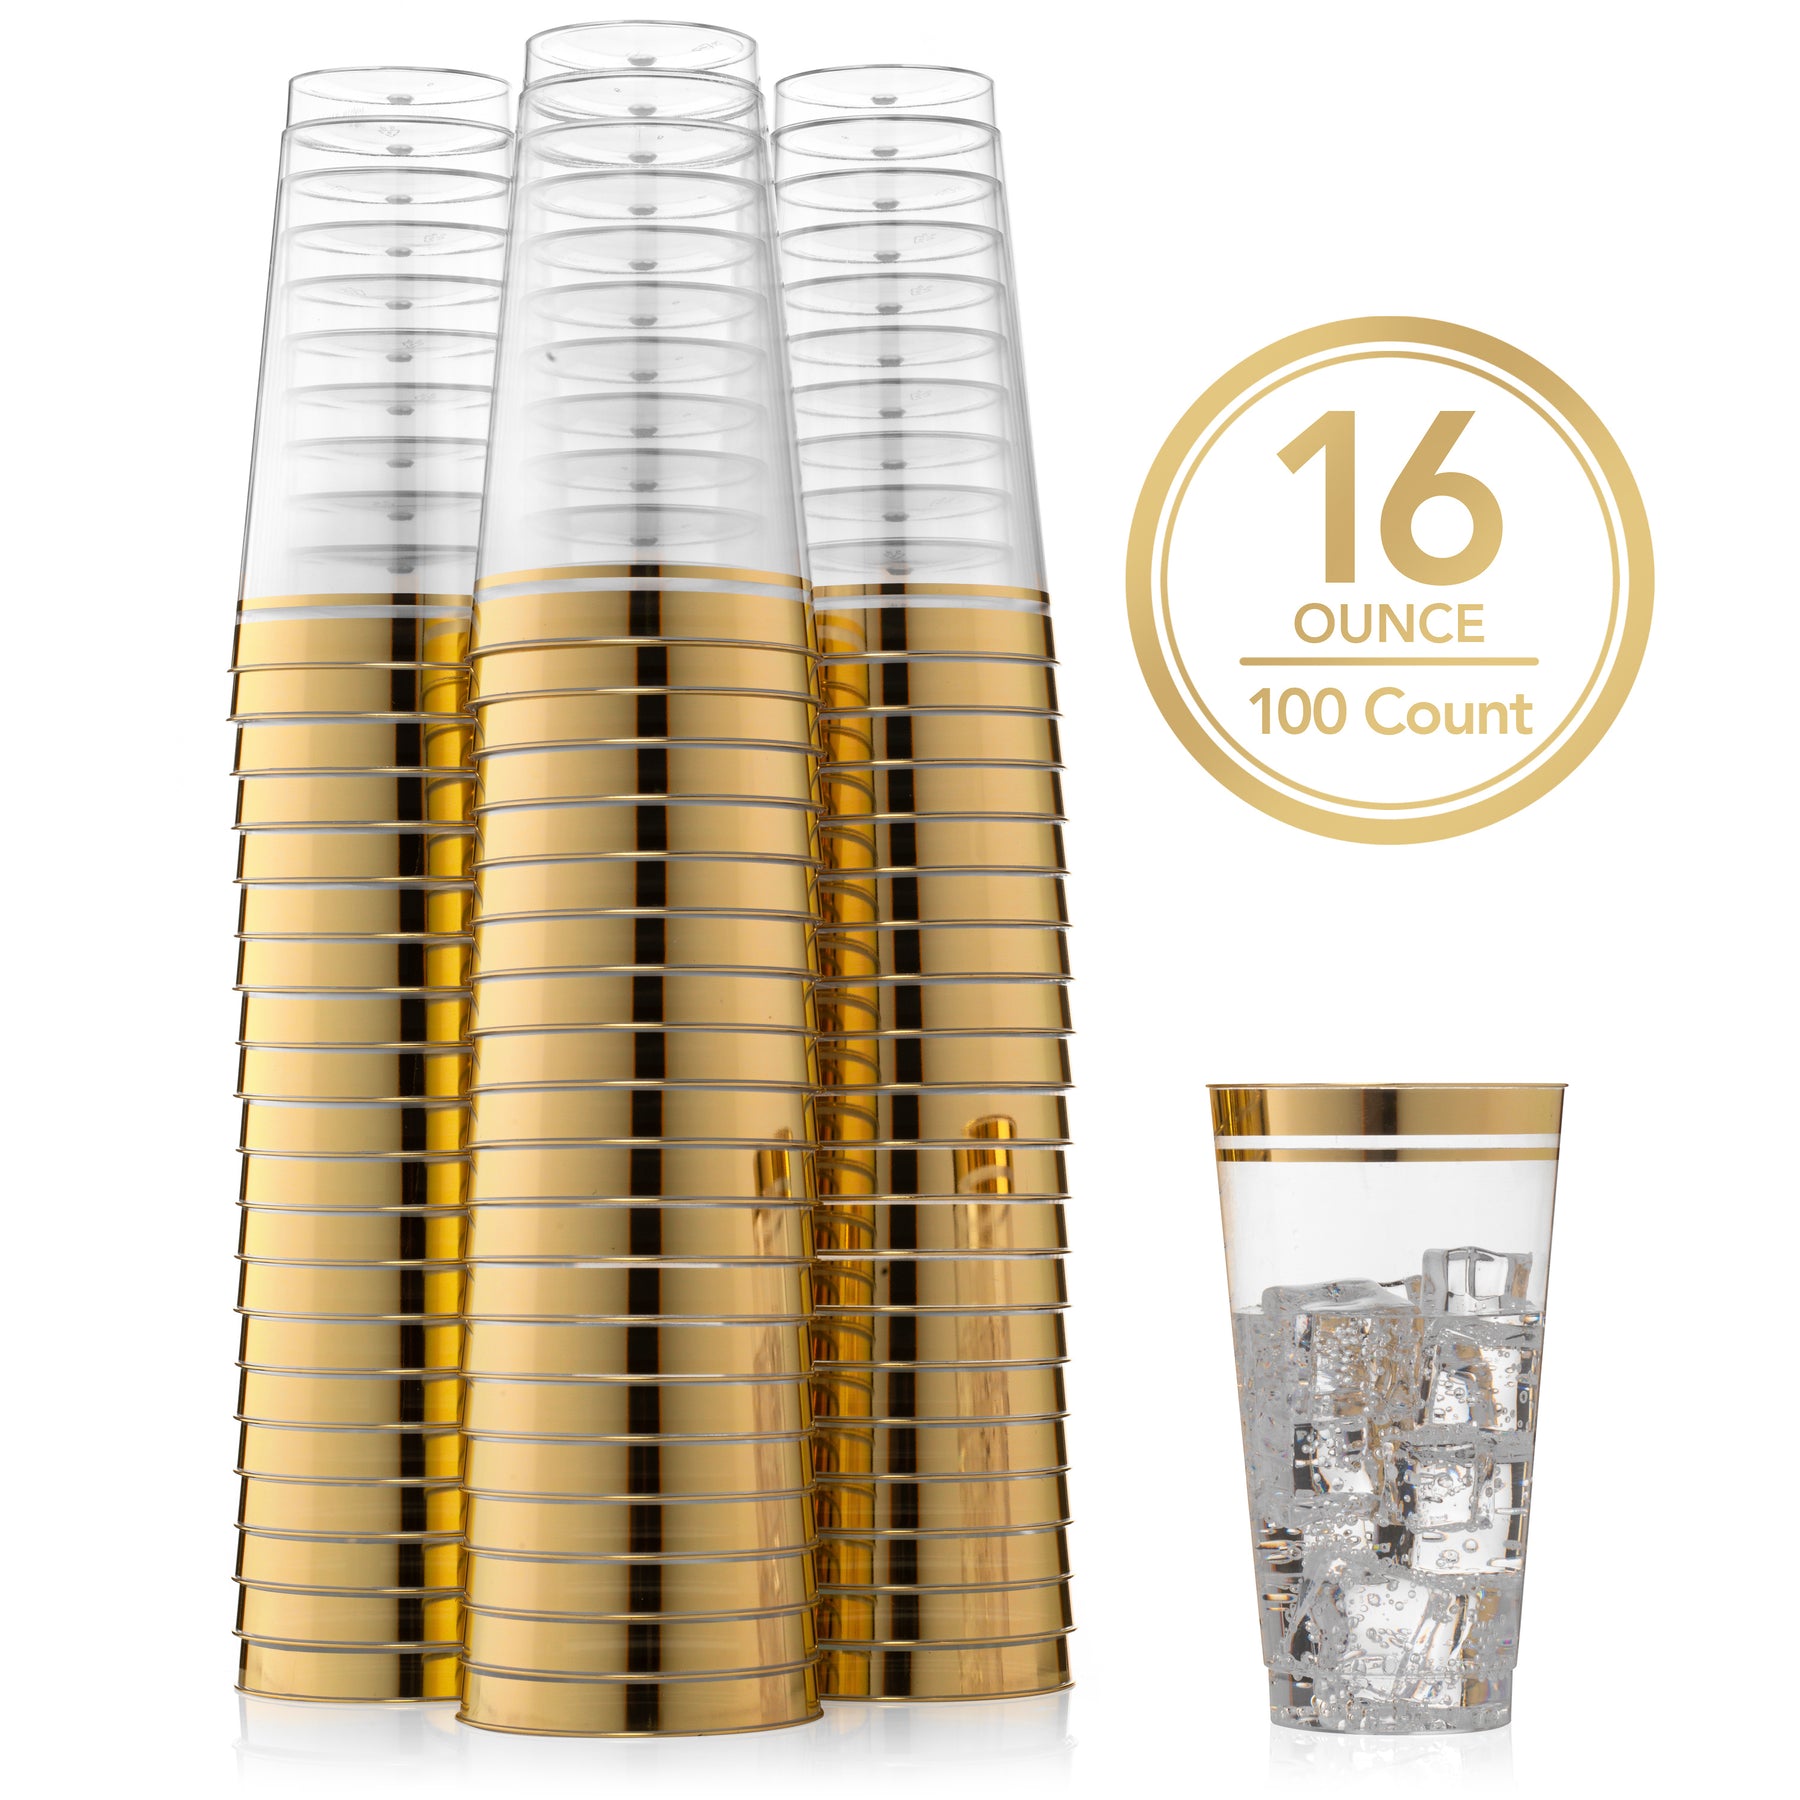 [200 PACK] 9 oz Clear Plastic Cups - Disposable 9 Ounce Cold Drink Party  Cups - Cold Drink, Soda Cups, Party Cups, Drinking Cups for Home, Office